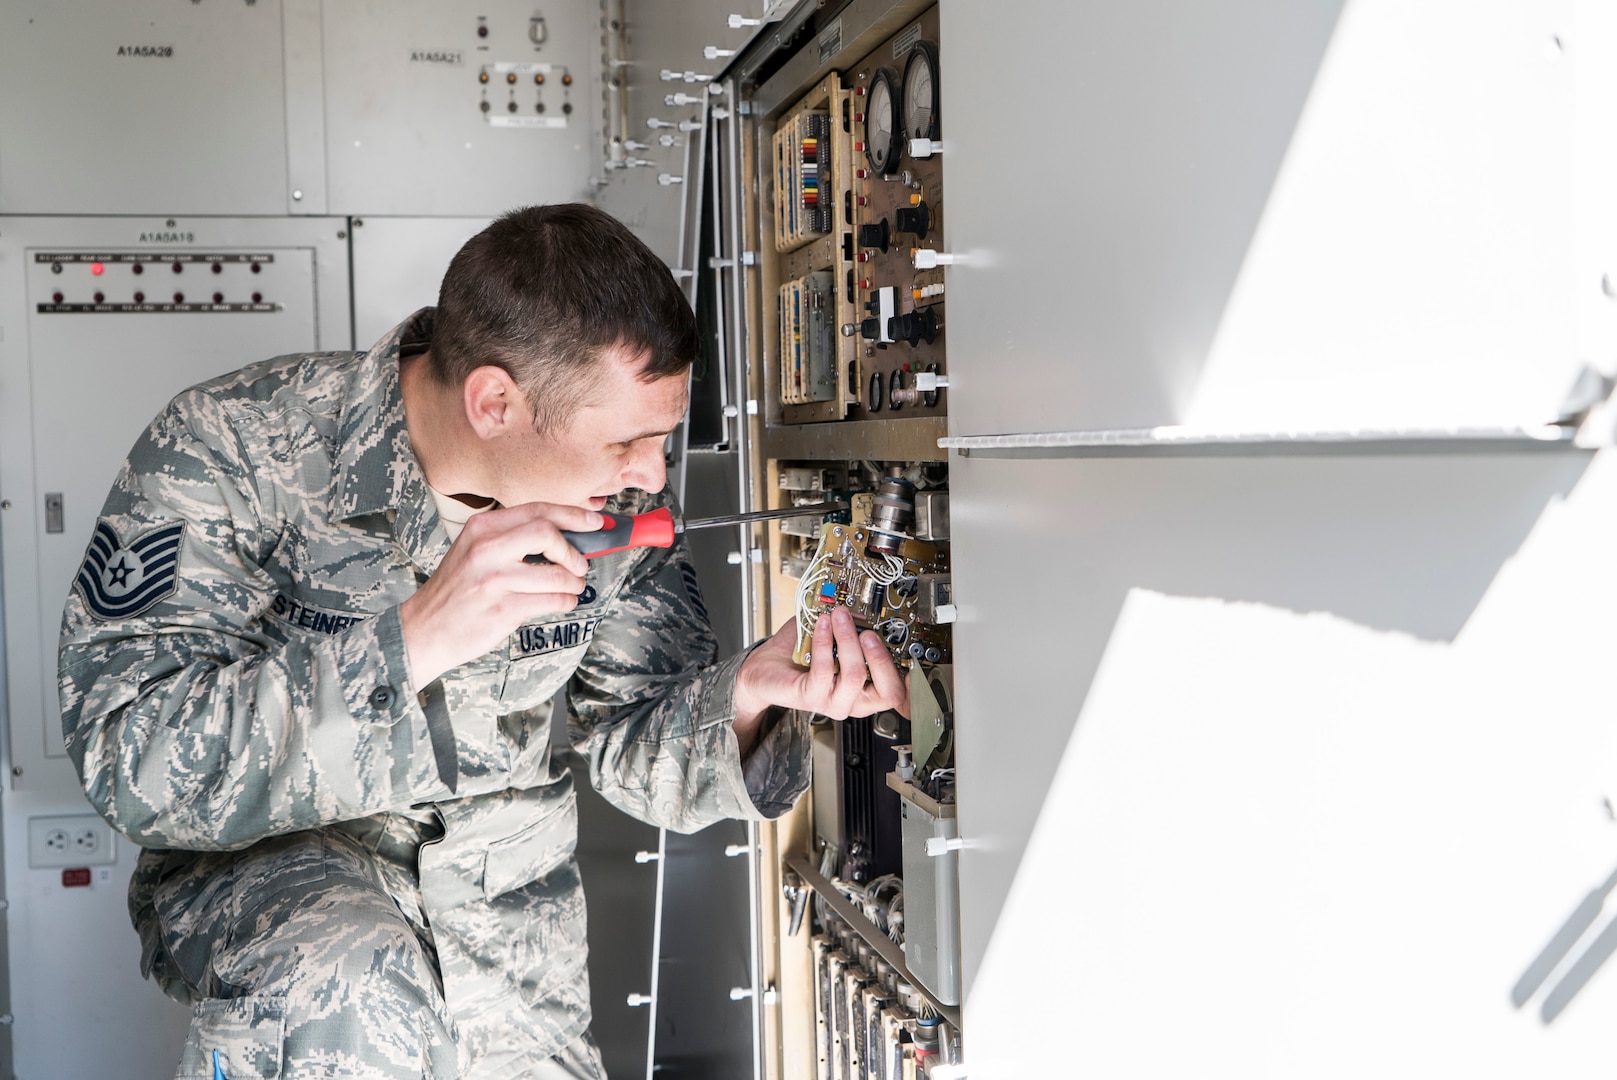 Tech. Sgt. Aaron Steinberg, 266th Range Squadron ground radar technician, installs a power supply on the Multiple Threat Emitter System at the Mountain Home Air Force Base Range Complex in Idaho May 9, 2017. The $20,000 power supply was broken and headed for the garbage, but the Air Force Repair Enhancement Program team managed to fix the part by replacing a $5 resistor. (U.S. Air Force photo/Staff Sgt. Samuel Morse)